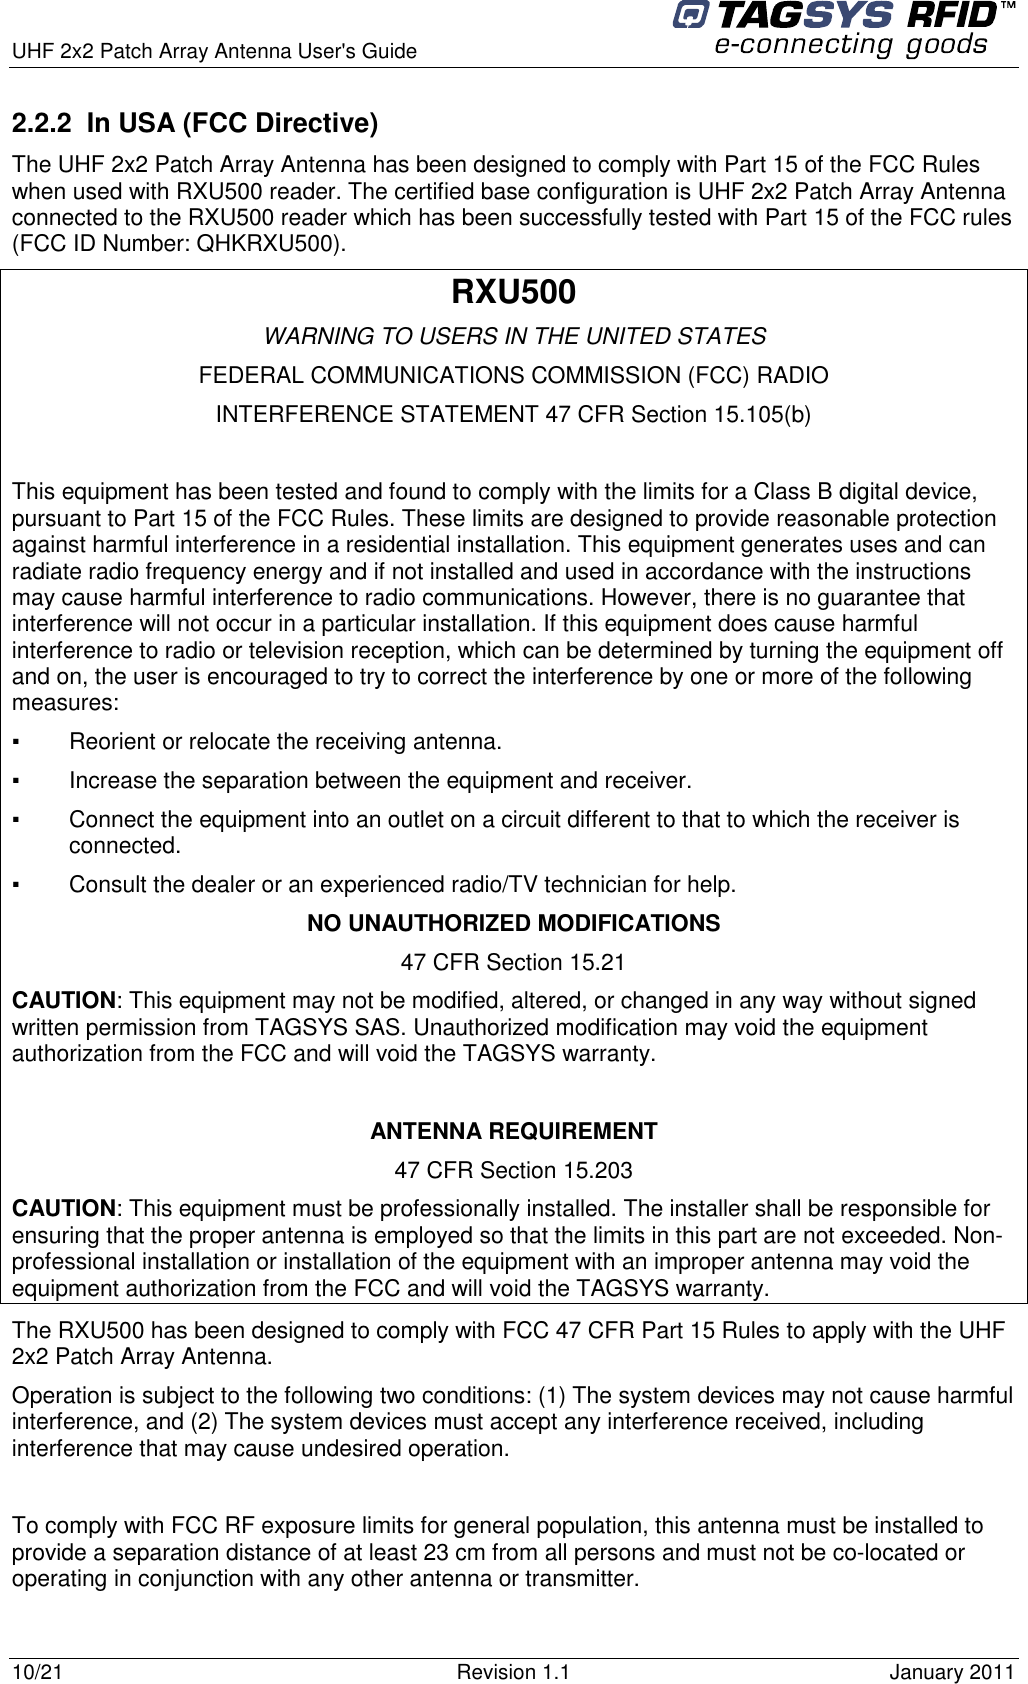  UHF 2x2 Patch Array Antenna User&apos;s Guide     10/21  Revision 1.1  January 2011 2.2.2  In USA (FCC Directive) The UHF 2x2 Patch Array Antenna has been designed to comply with Part 15 of the FCC Rules when used with RXU500 reader. The certified base configuration is UHF 2x2 Patch Array Antenna connected to the RXU500 reader which has been successfully tested with Part 15 of the FCC rules (FCC ID Number: QHKRXU500).  RXU500 WARNING TO USERS IN THE UNITED STATES FEDERAL COMMUNICATIONS COMMISSION (FCC) RADIO INTERFERENCE STATEMENT 47 CFR Section 15.105(b)  This equipment has been tested and found to comply with the limits for a Class B digital device, pursuant to Part 15 of the FCC Rules. These limits are designed to provide reasonable protection against harmful interference in a residential installation. This equipment generates uses and can radiate radio frequency energy and if not installed and used in accordance with the instructions may cause harmful interference to radio communications. However, there is no guarantee that interference will not occur in a particular installation. If this equipment does cause harmful interference to radio or television reception, which can be determined by turning the equipment off and on, the user is encouraged to try to correct the interference by one or more of the following measures:  ▪   Reorient or relocate the receiving antenna. ▪   Increase the separation between the equipment and receiver. ▪   Connect the equipment into an outlet on a circuit different to that to which the receiver is connected. ▪   Consult the dealer or an experienced radio/TV technician for help. NO UNAUTHORIZED MODIFICATIONS 47 CFR Section 15.21 CAUTION: This equipment may not be modified, altered, or changed in any way without signed written permission from TAGSYS SAS. Unauthorized modification may void the equipment authorization from the FCC and will void the TAGSYS warranty.  ANTENNA REQUIREMENT 47 CFR Section 15.203 CAUTION: This equipment must be professionally installed. The installer shall be responsible for ensuring that the proper antenna is employed so that the limits in this part are not exceeded. Non-professional installation or installation of the equipment with an improper antenna may void the equipment authorization from the FCC and will void the TAGSYS warranty. The RXU500 has been designed to comply with FCC 47 CFR Part 15 Rules to apply with the UHF 2x2 Patch Array Antenna. Operation is subject to the following two conditions: (1) The system devices may not cause harmful interference, and (2) The system devices must accept any interference received, including interference that may cause undesired operation.  To comply with FCC RF exposure limits for general population, this antenna must be installed to provide a separation distance of at least 23 cm from all persons and must not be co-located or operating in conjunction with any other antenna or transmitter. 